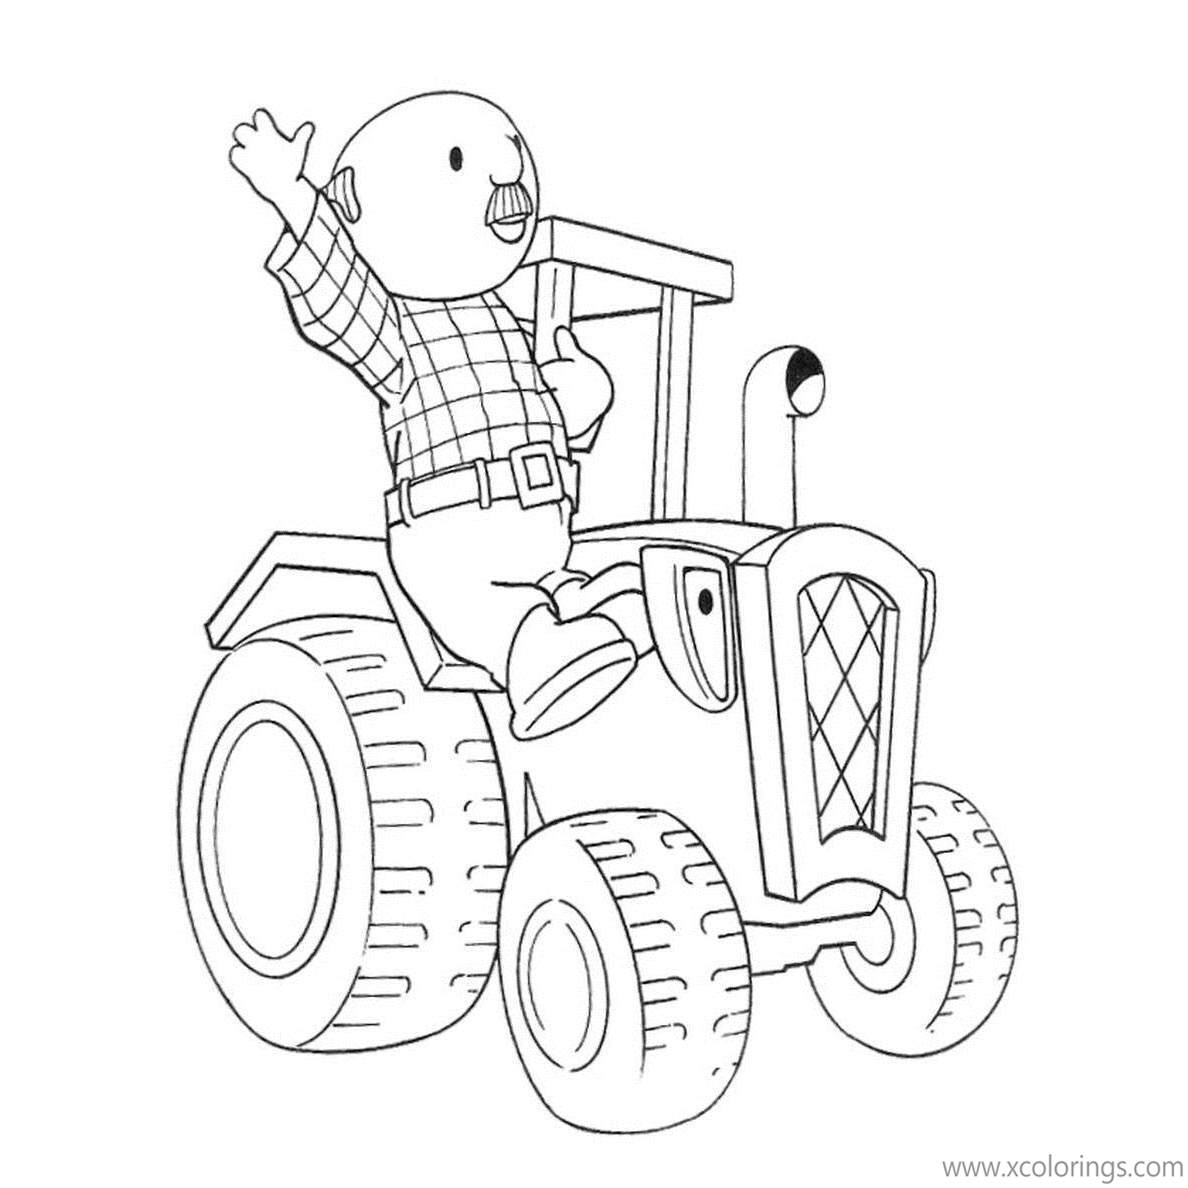 Free Bob The Builder Coloring Pages Mr Bernard Bentley and Travis printable